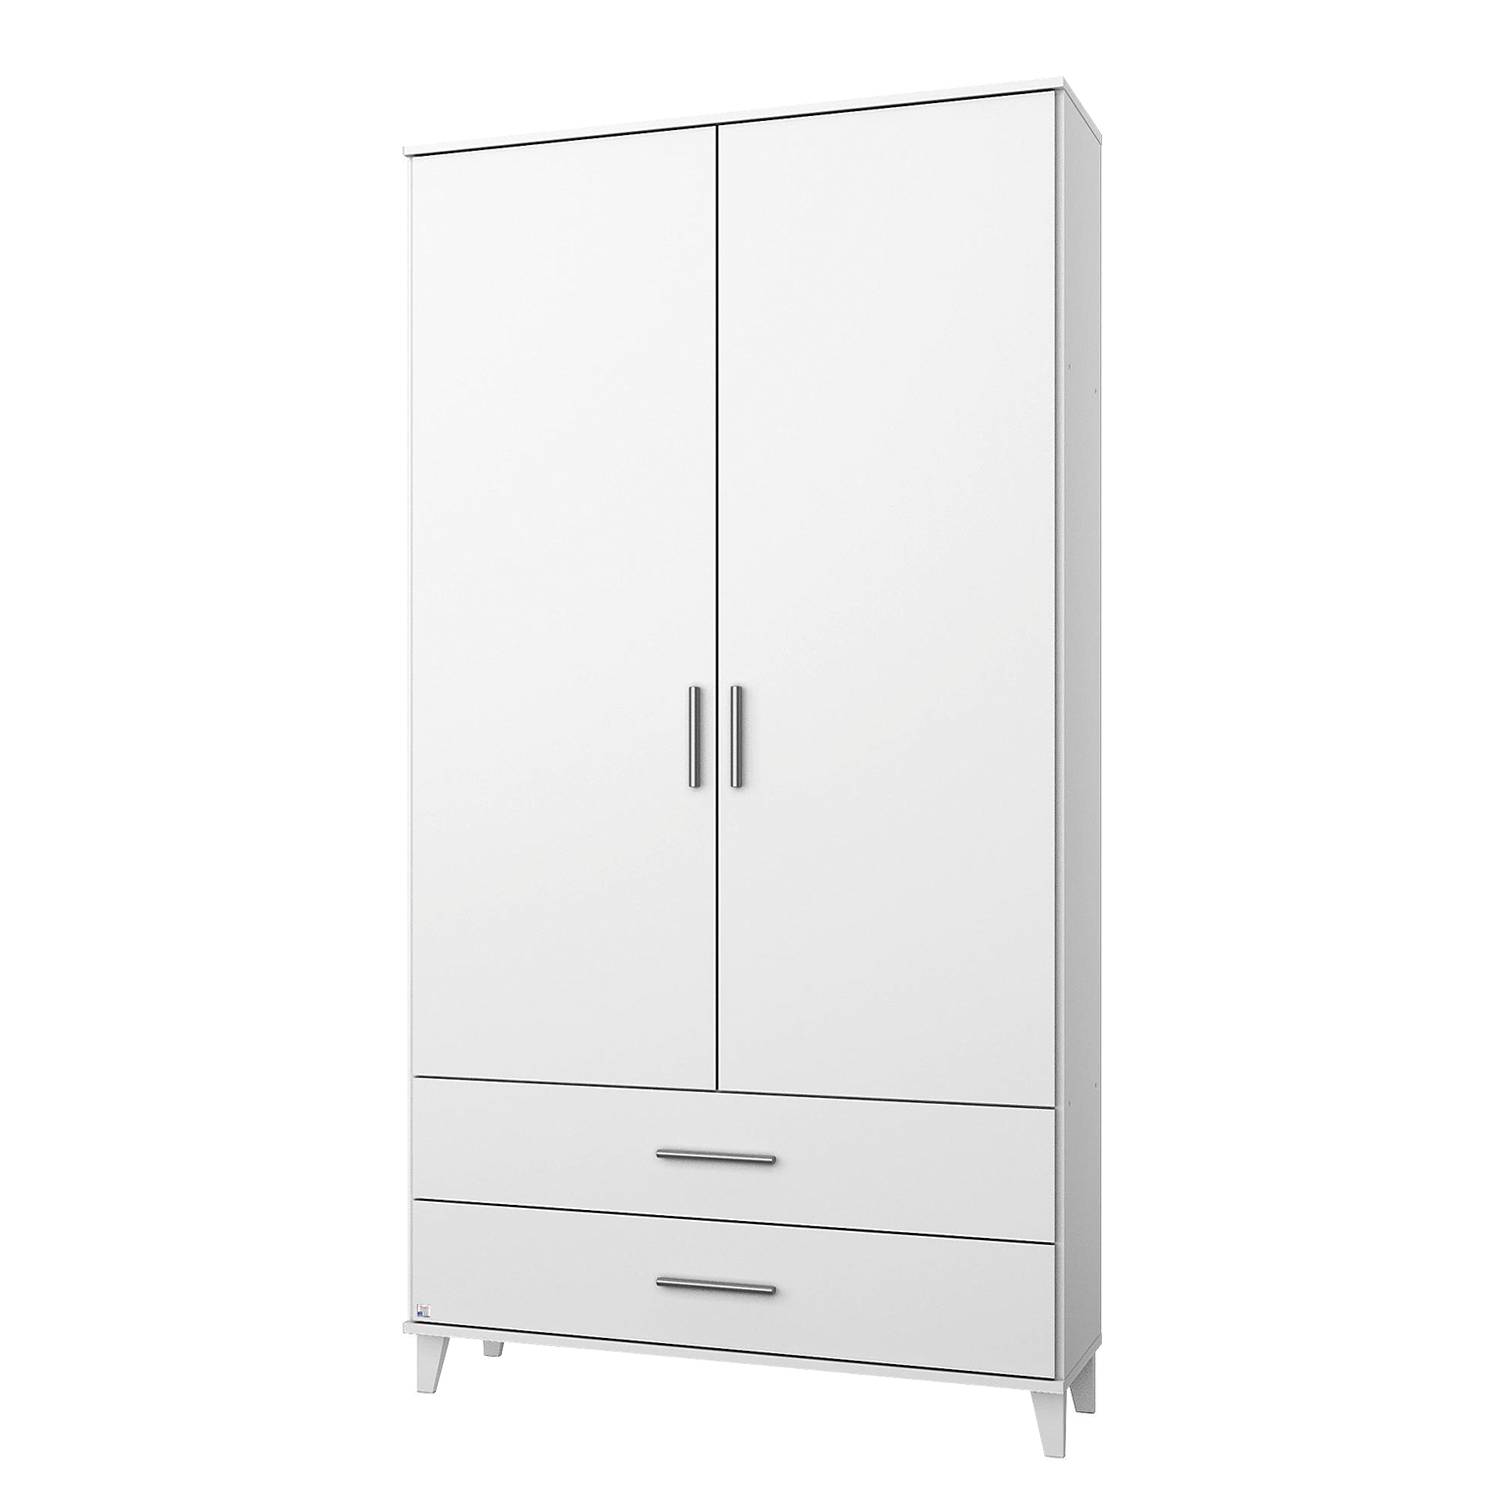 Image of Armoire Aik 000000001000232782